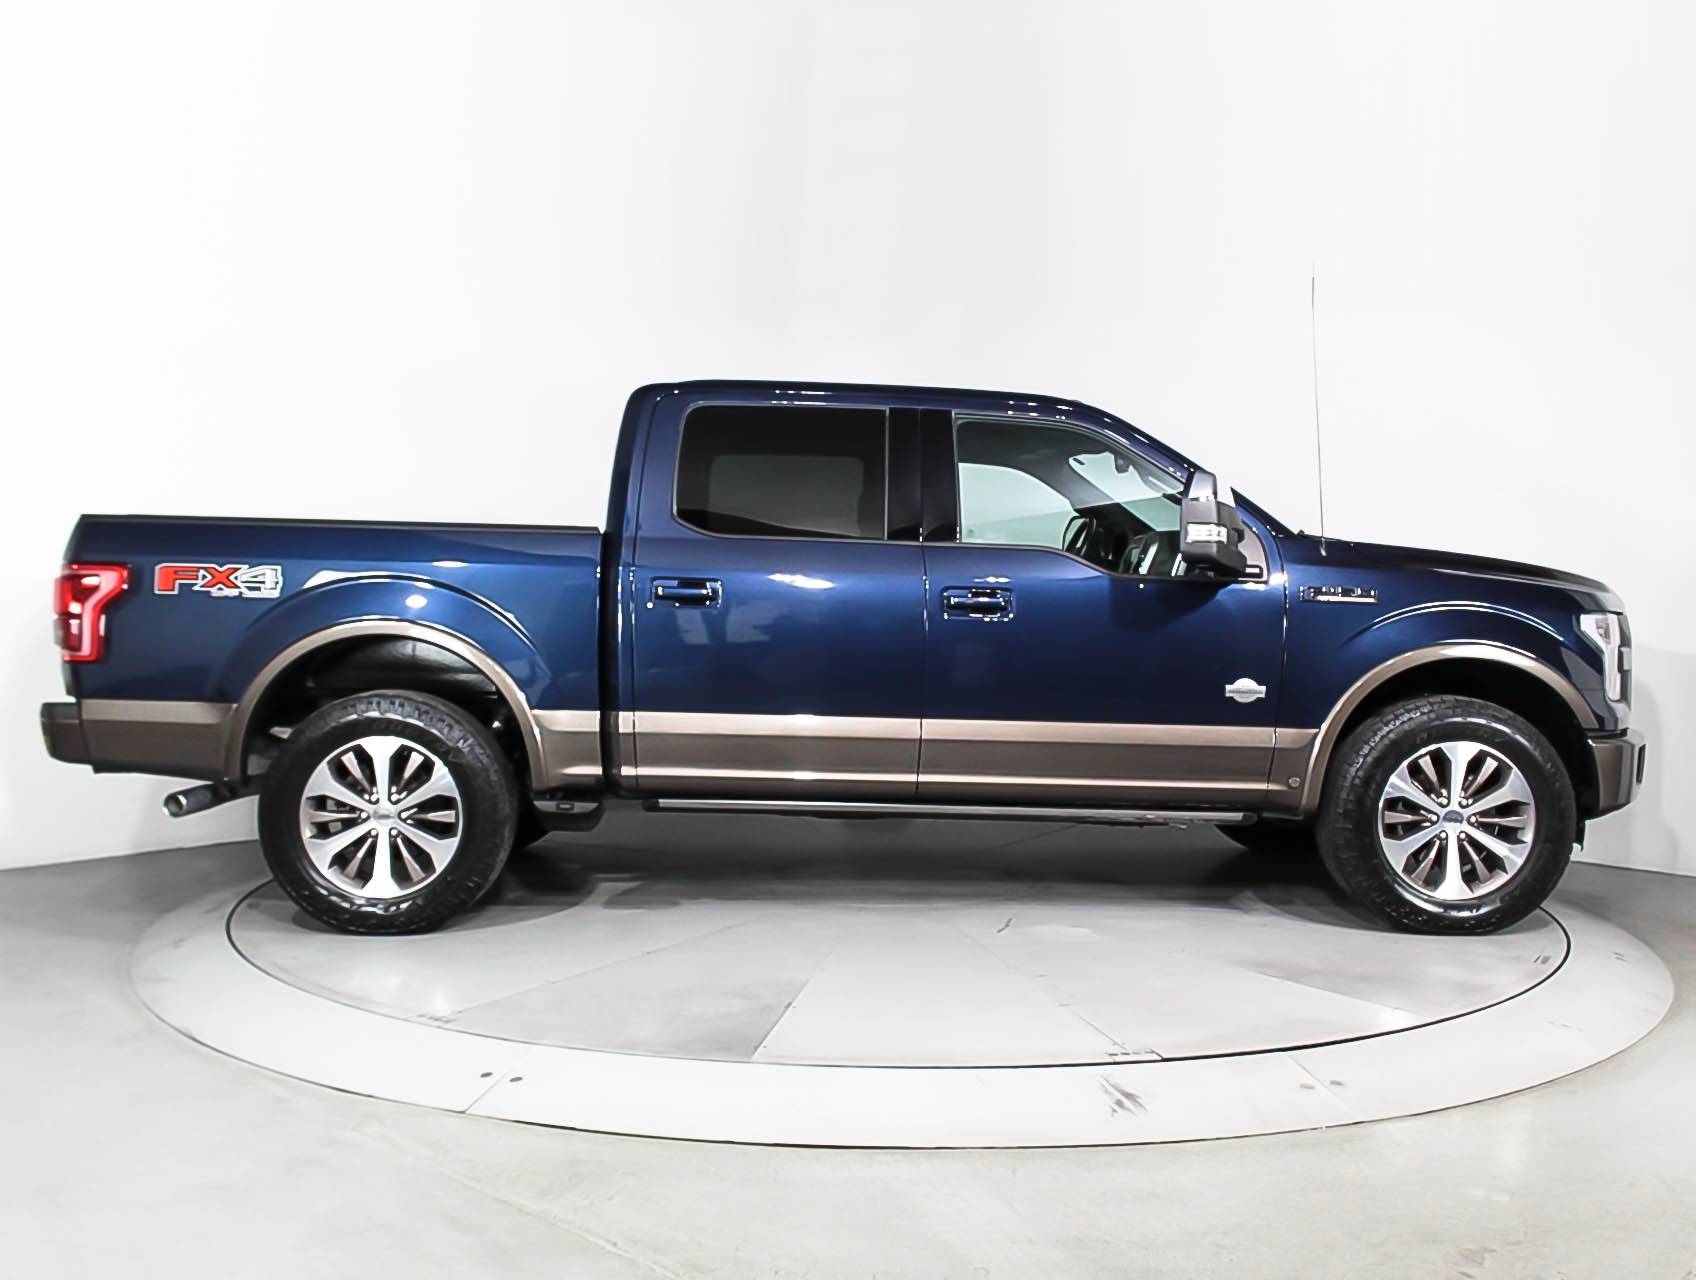 Florida Fine Cars - Used FORD F 150 2015 MIAMI King Ranch Fx4